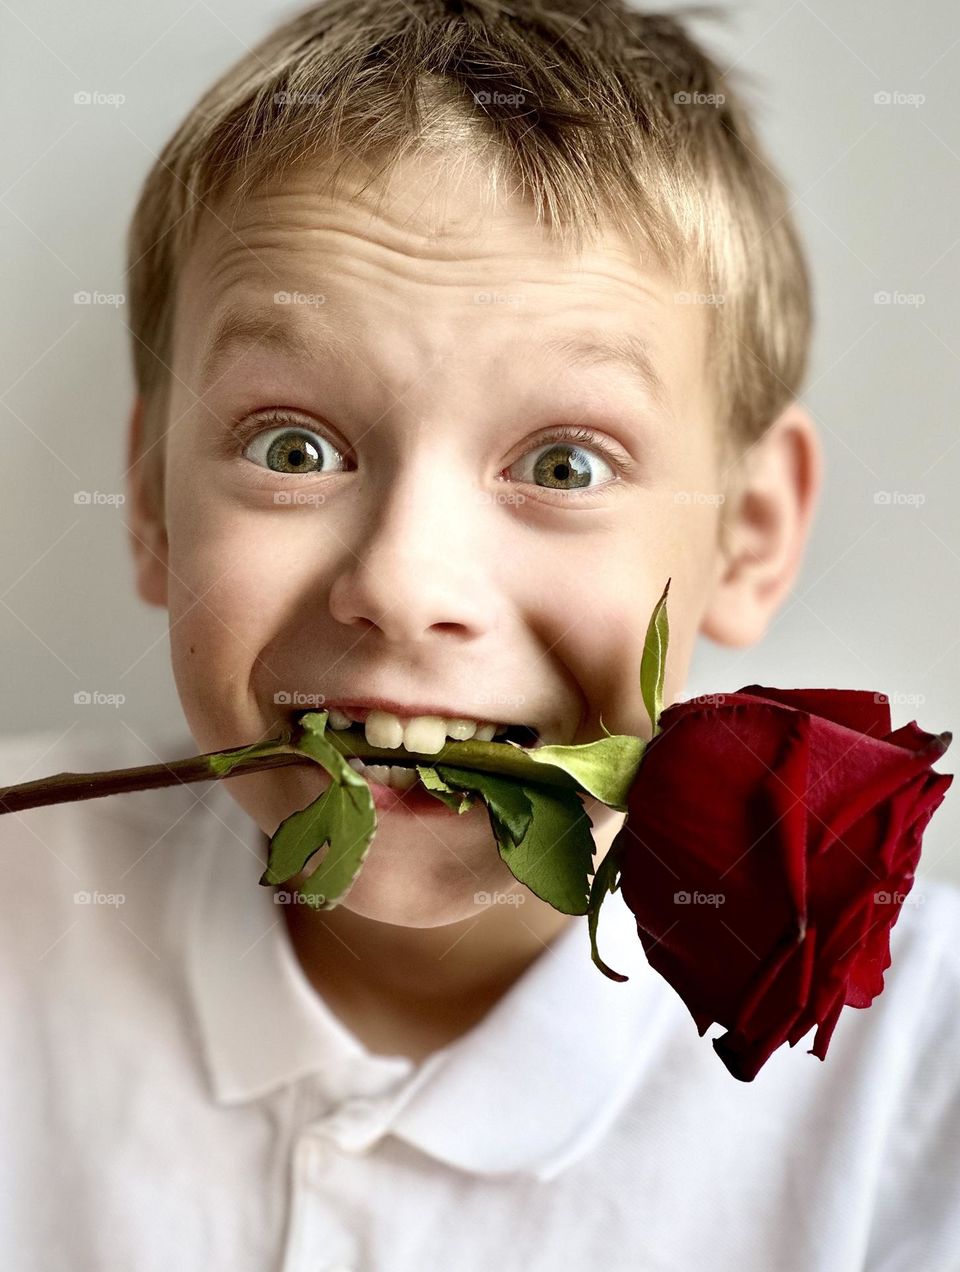 smiling boy with a rose in his mouth